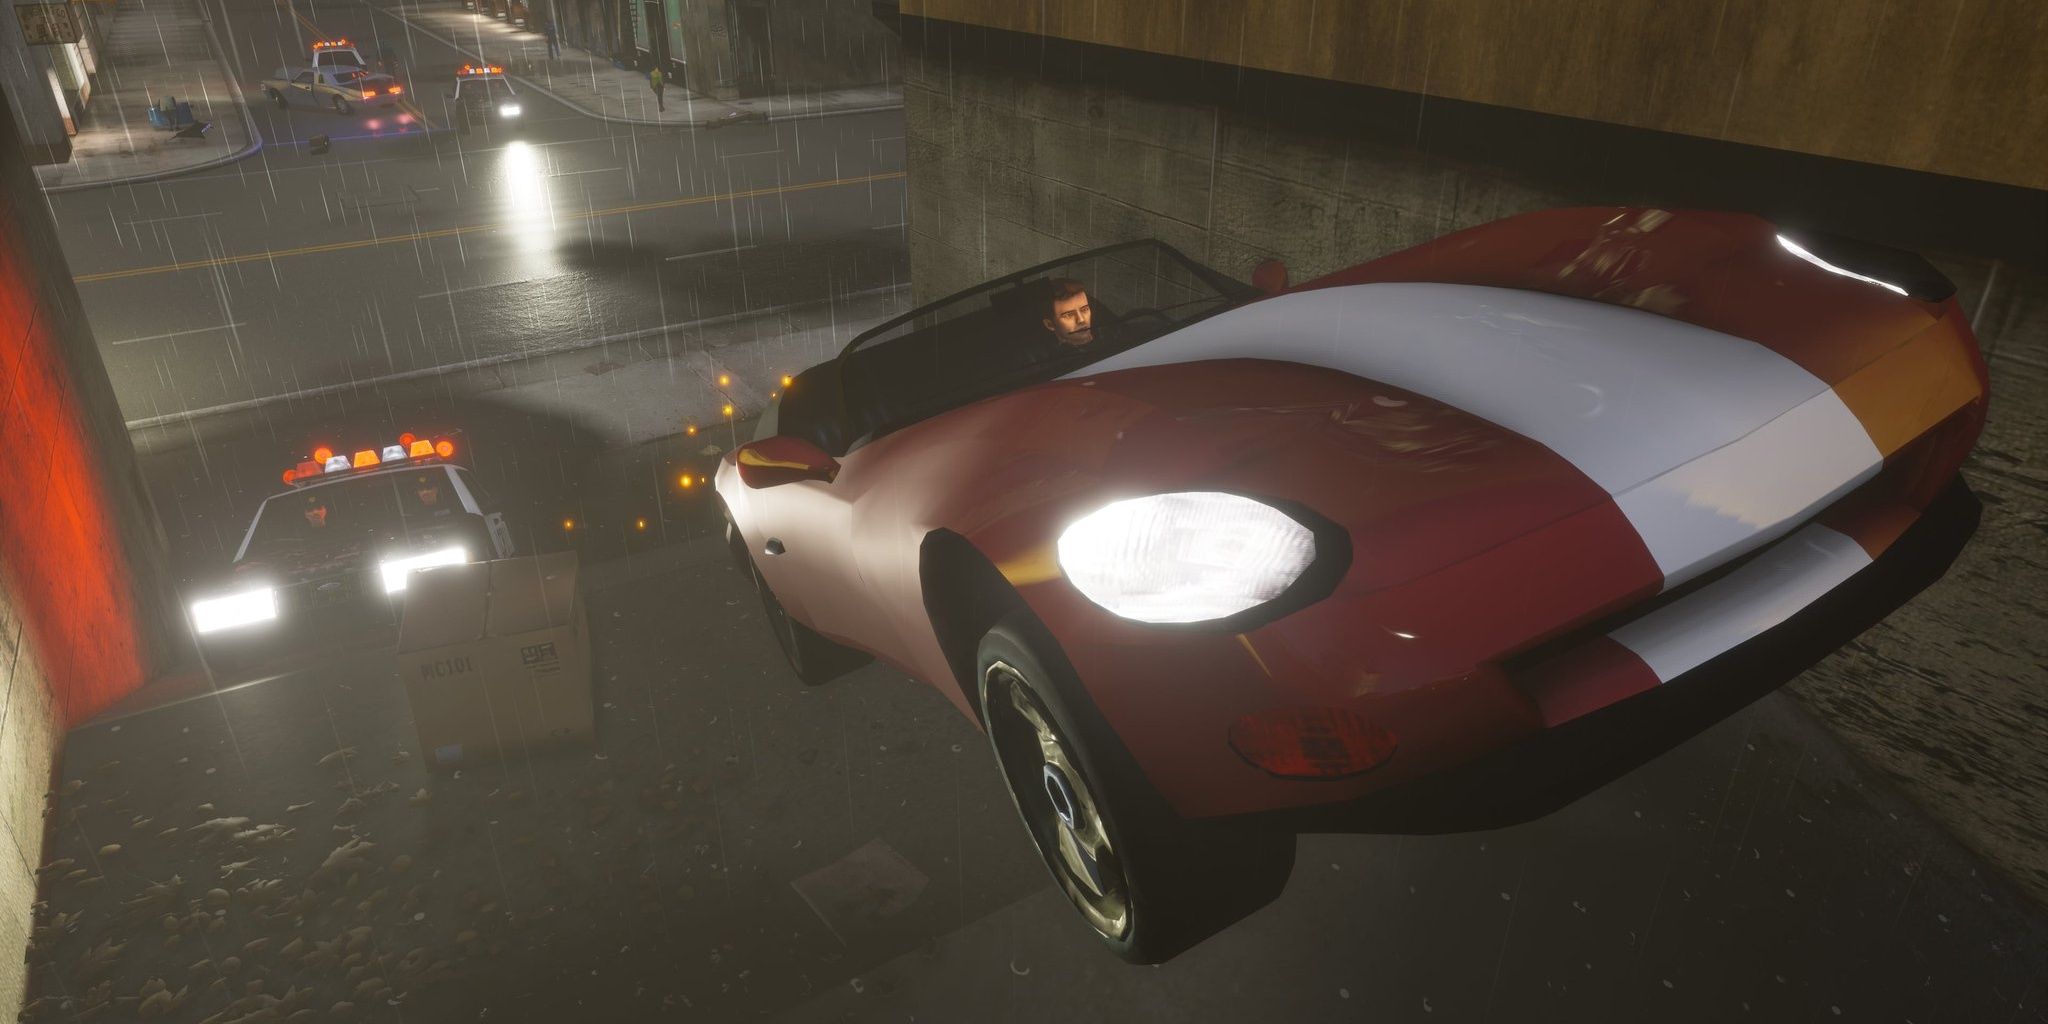 A screenshot showing Claude trying to evade the police in a car chase in Grand Theft Auto 3: The Definitive Edition